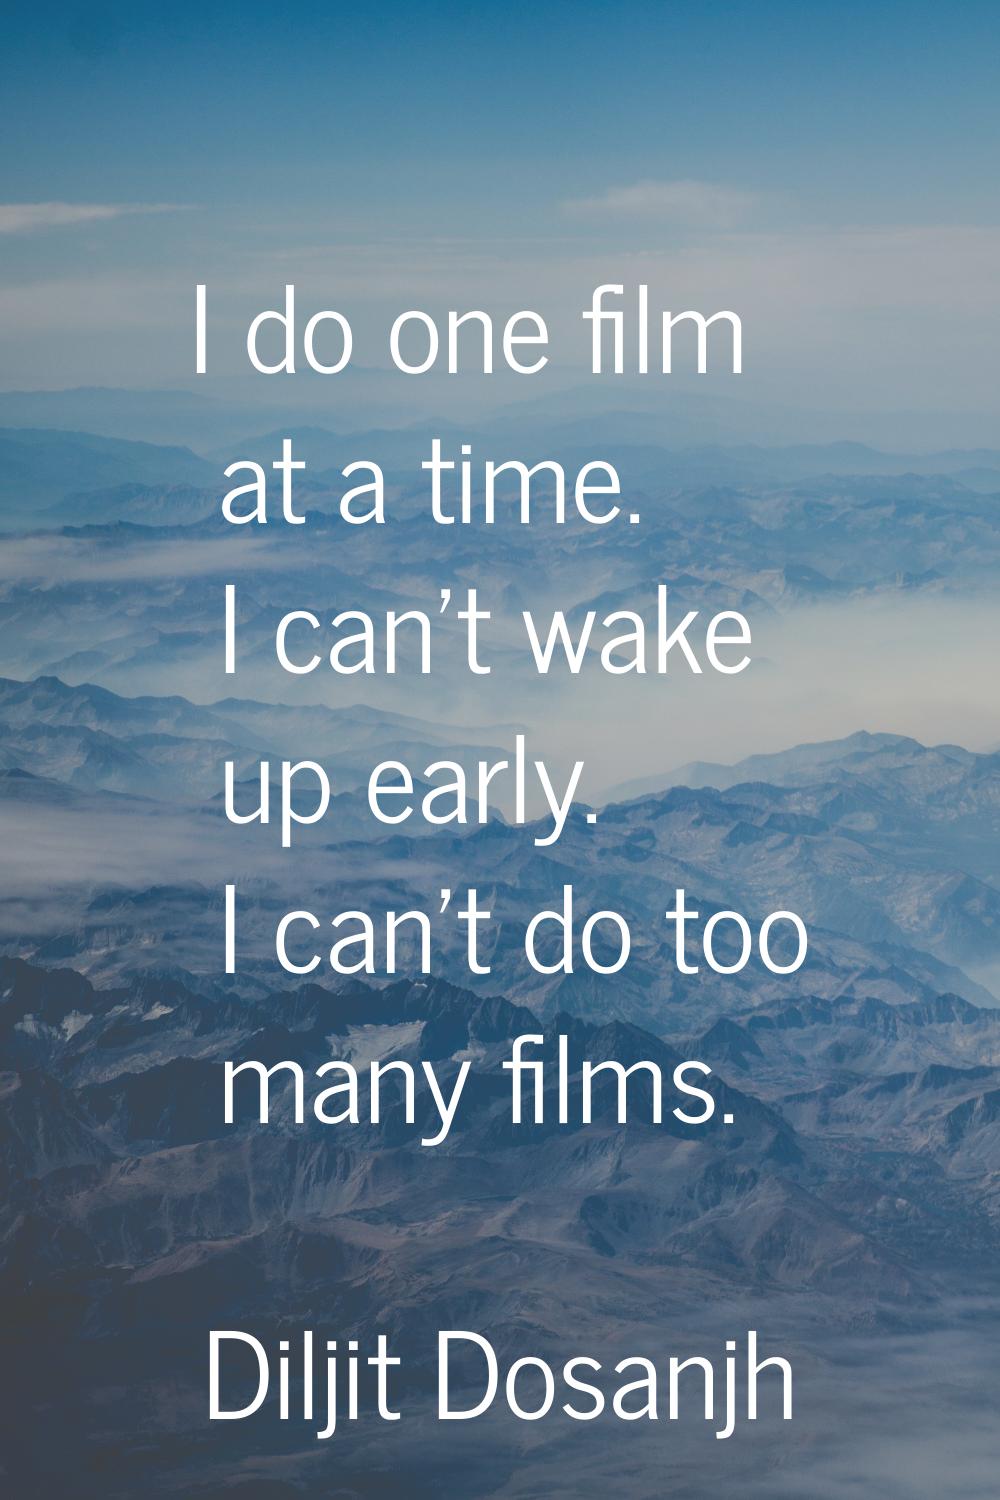 I do one film at a time. I can't wake up early. I can't do too many films.